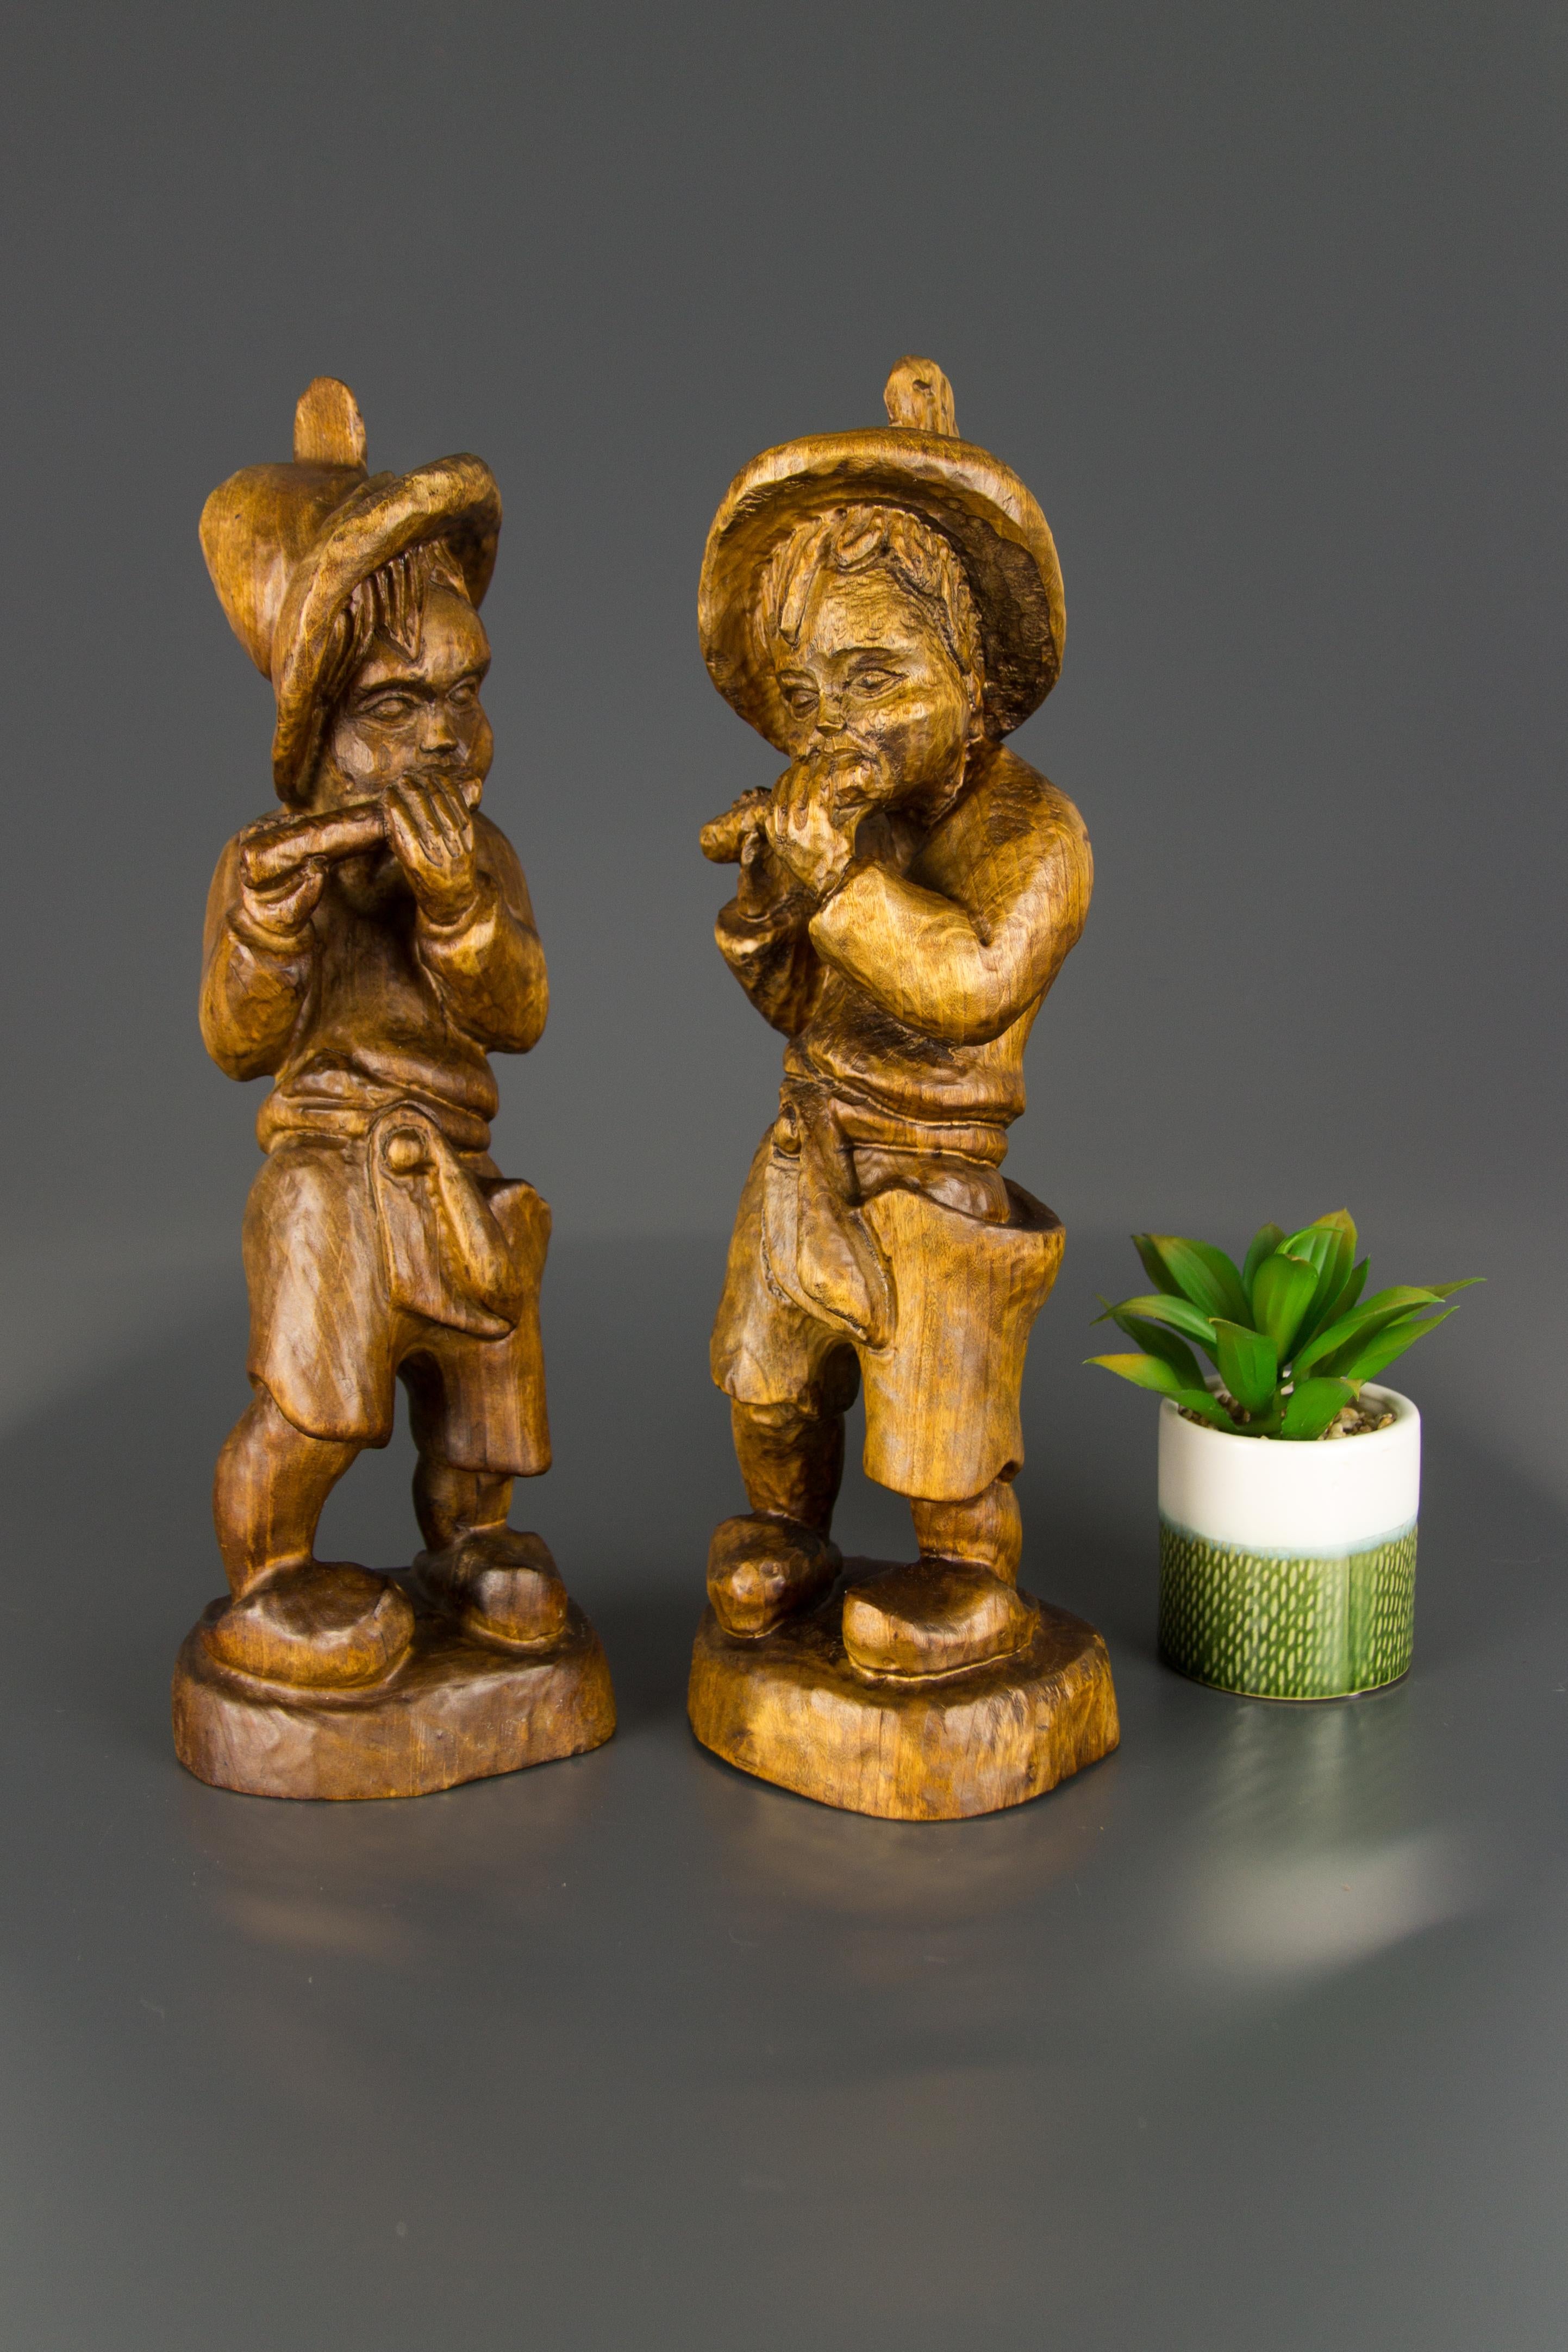 Adorable pair of hand carved wooden figurines of two boys playing the whistle, Germany, the first half of the 20th century.
Dimensions: Height 38 cm / 14.96 in, width circa 12 cm / 4.72 in, depth circa 9 cm / 3.54 in.
   